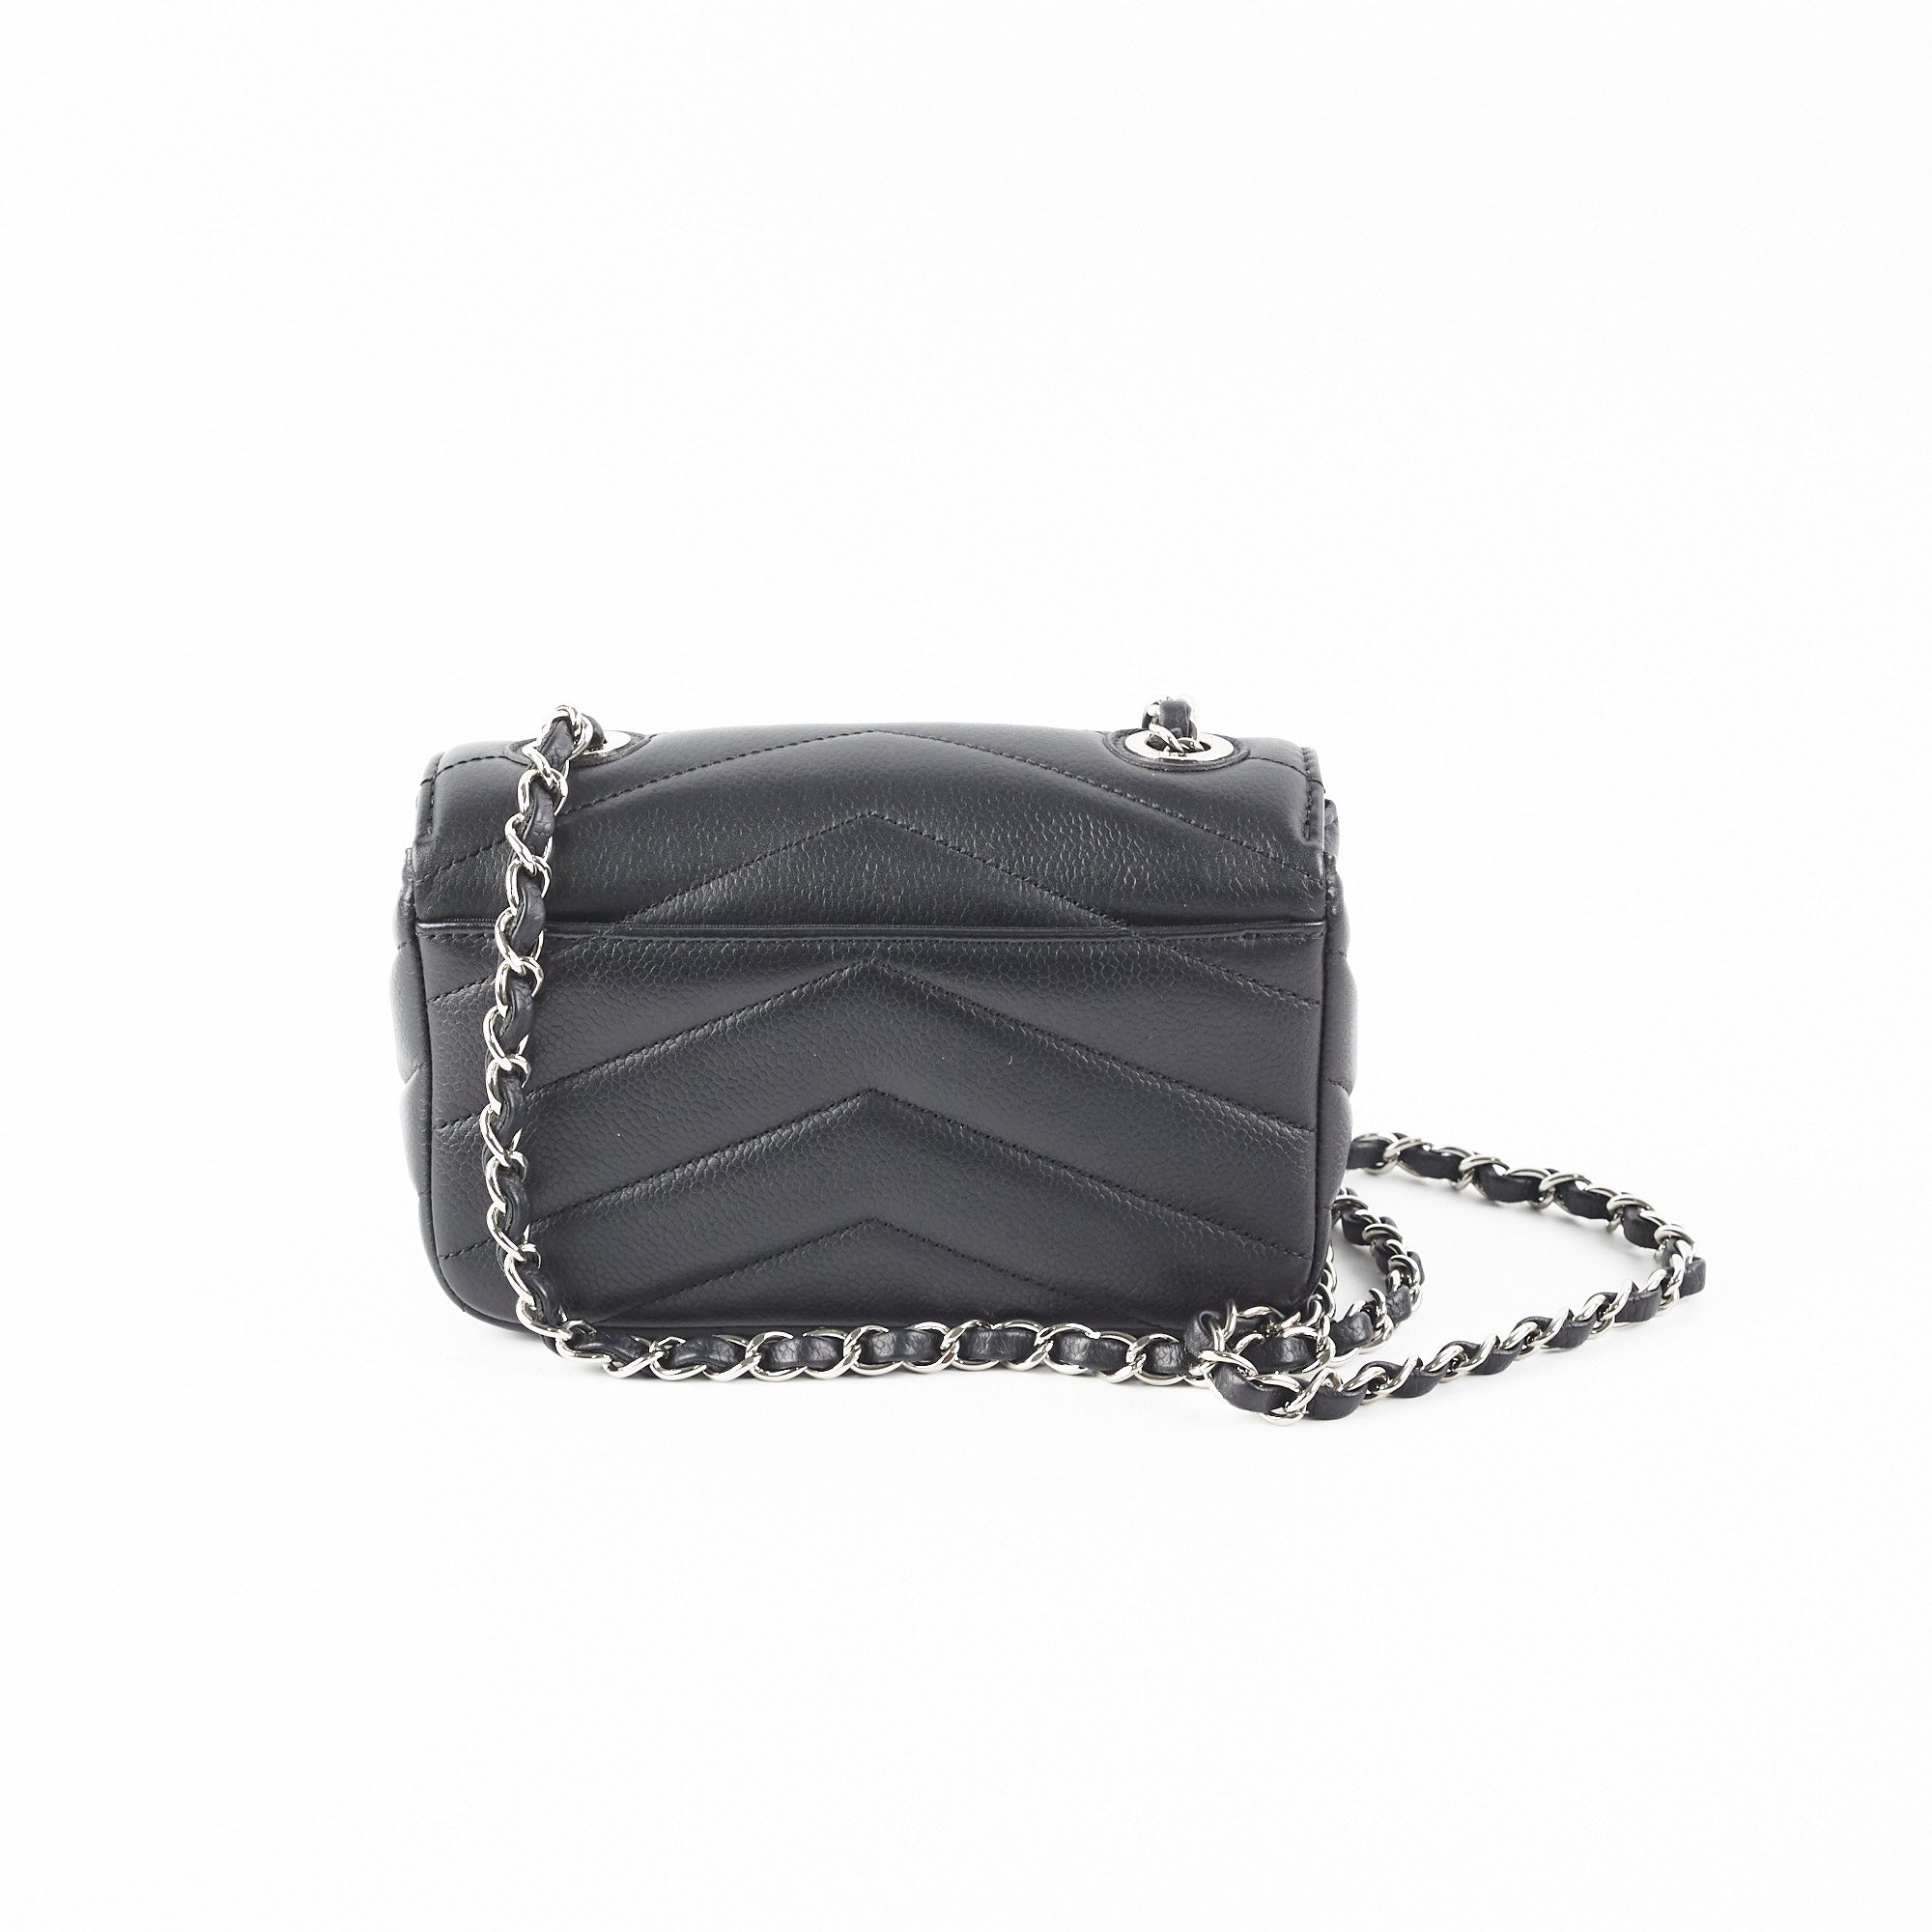 Black Chanel Leather Bag with Leather Logo  Harrietts Closet